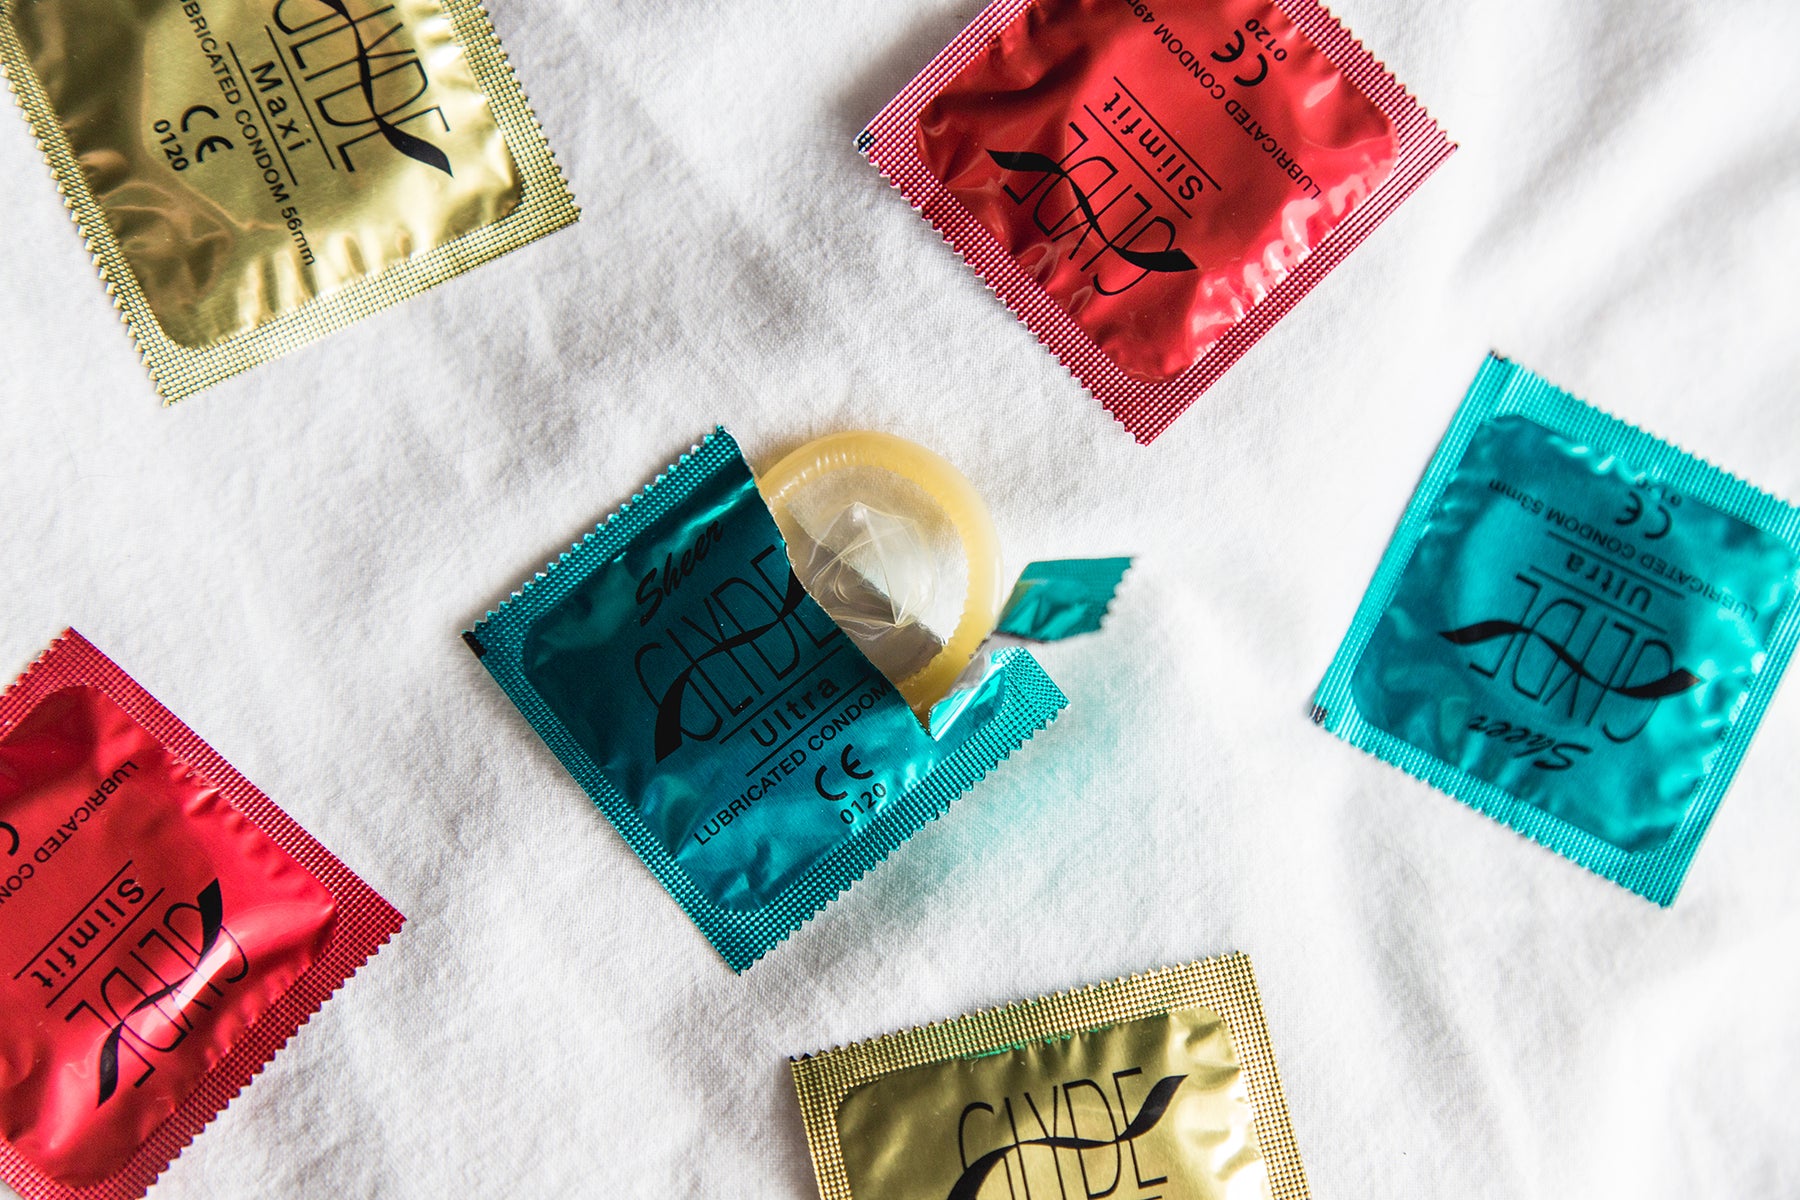 Are Your Condoms Body-Safe? A Guide to Non-Toxic Safe Sex